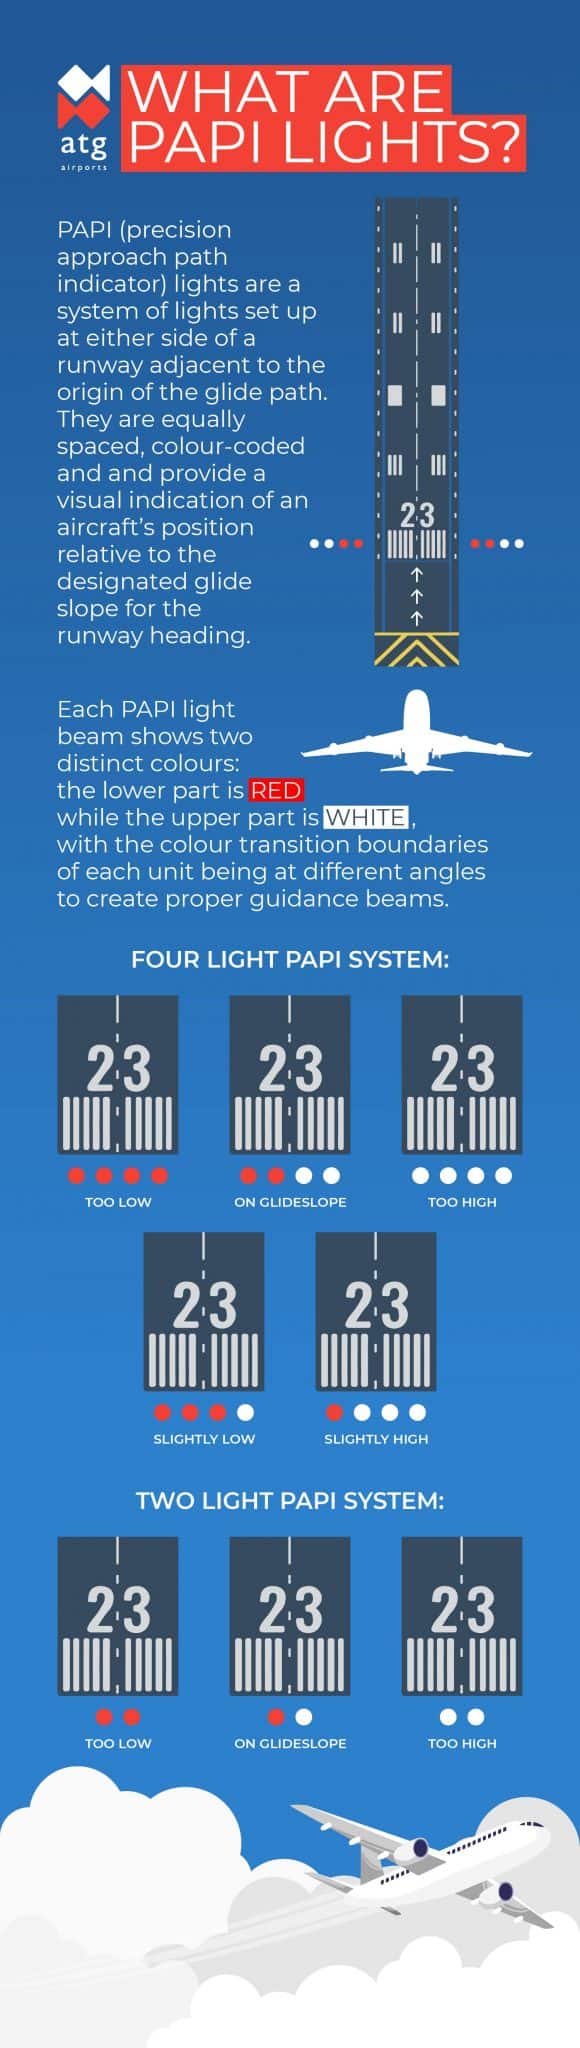 What are PAPI Lights Infographic